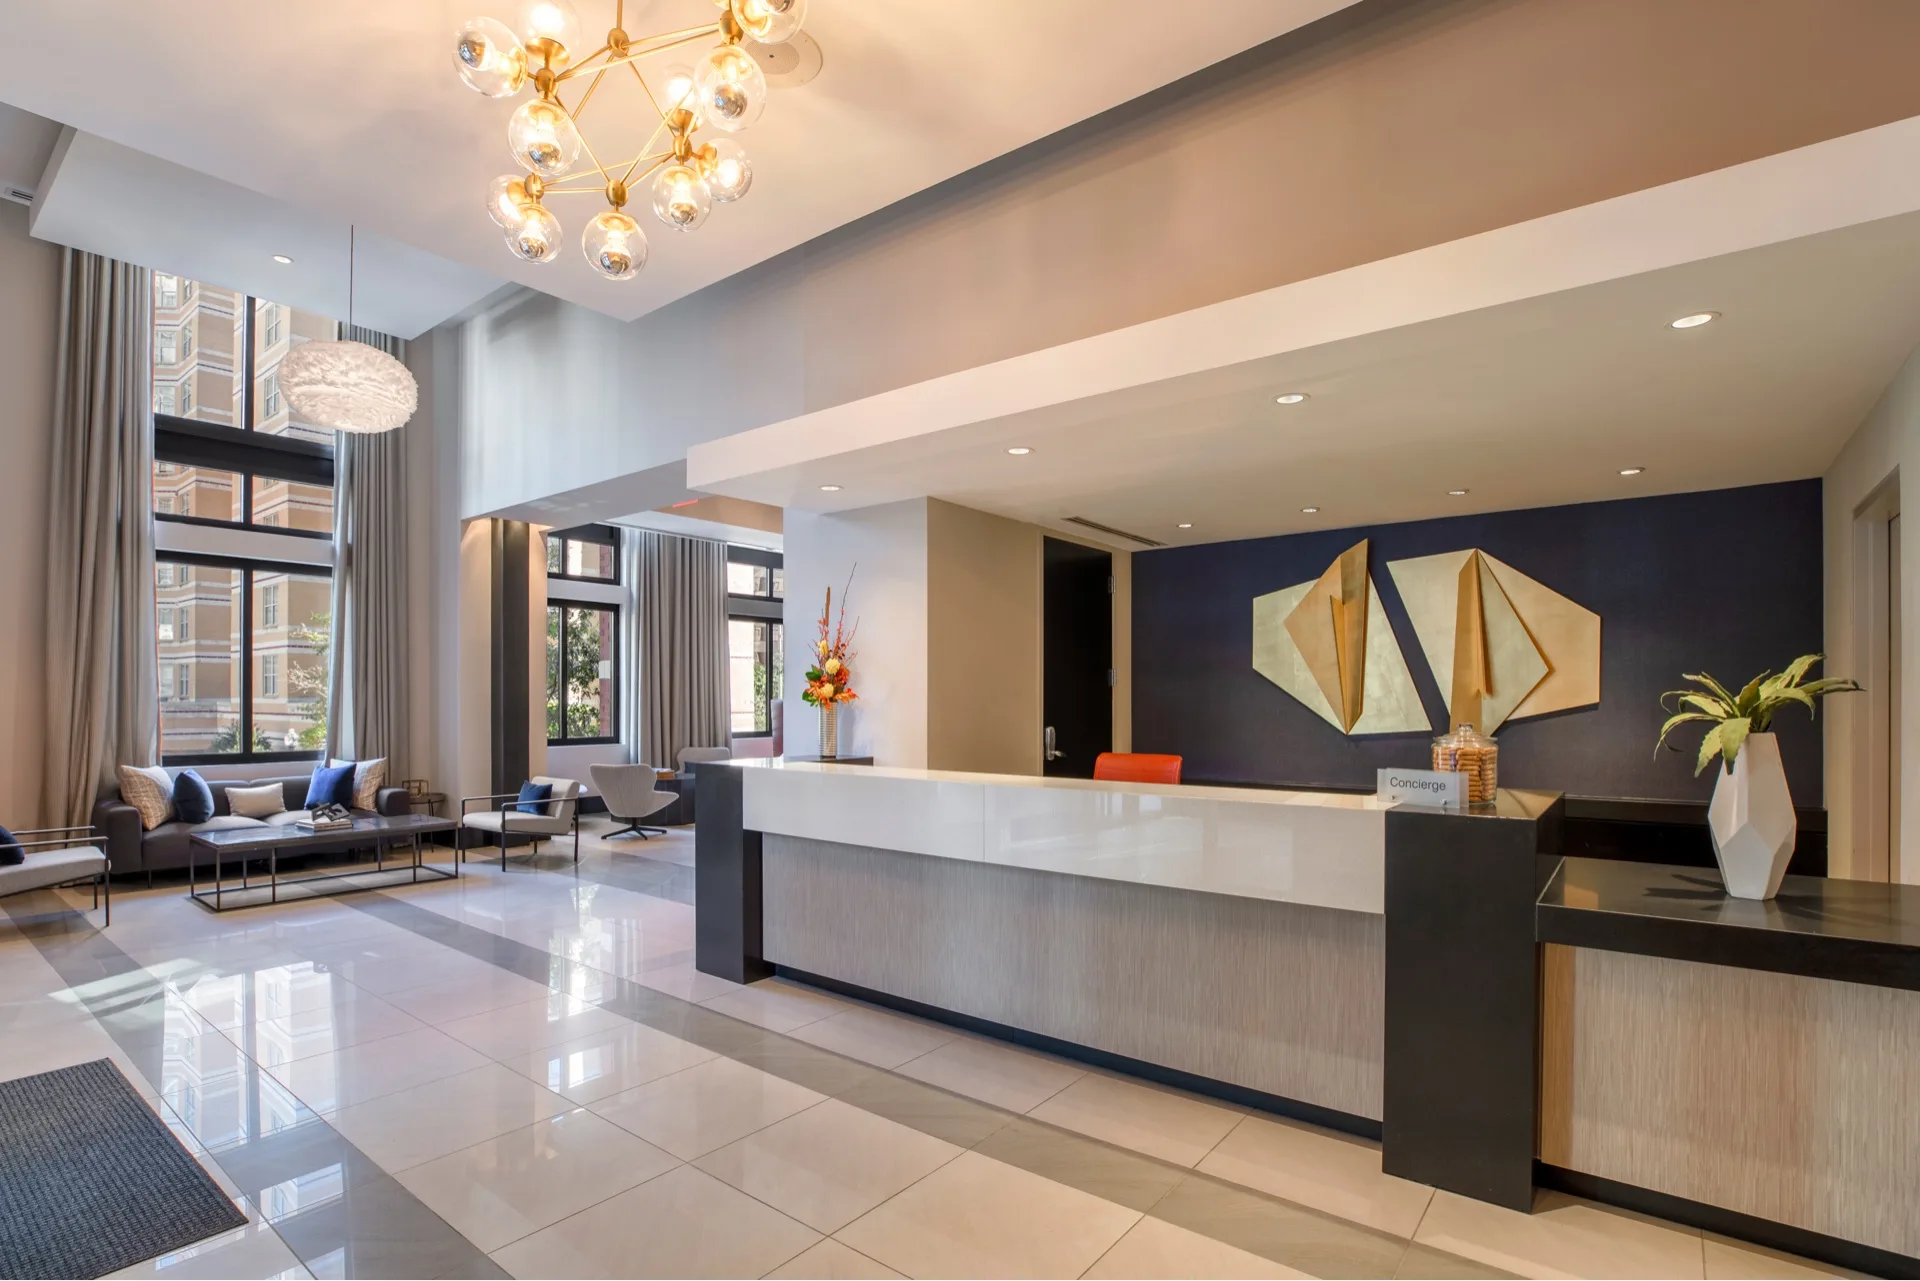 Lobby and front desk with eye-catching decorations